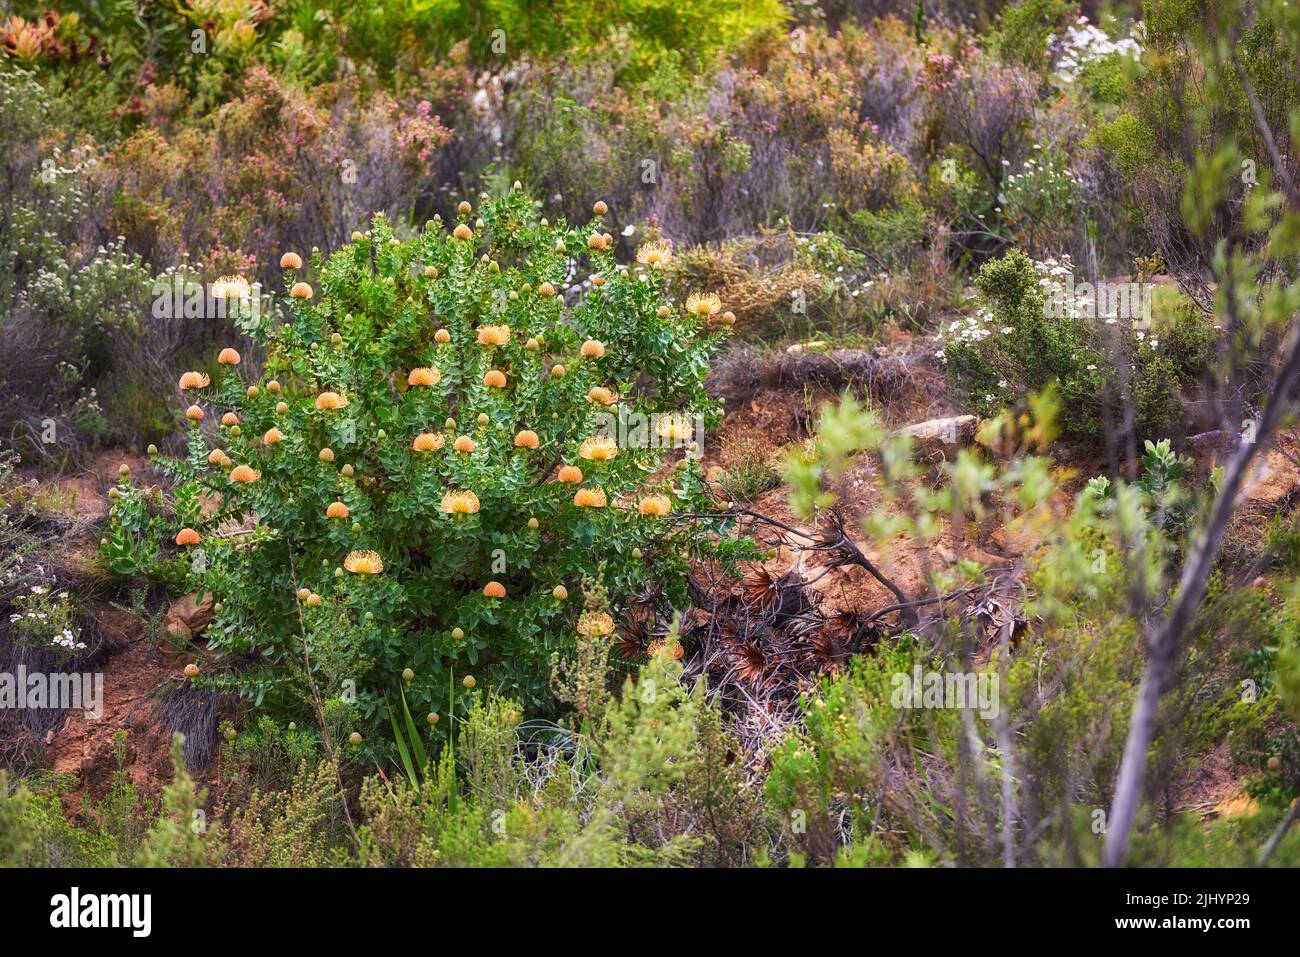 Pincushion protea flowers on a mountainside outdoors during Summer. Isolated natural spurges of yellow petals blossoming and with green bushes behind Stock Photo